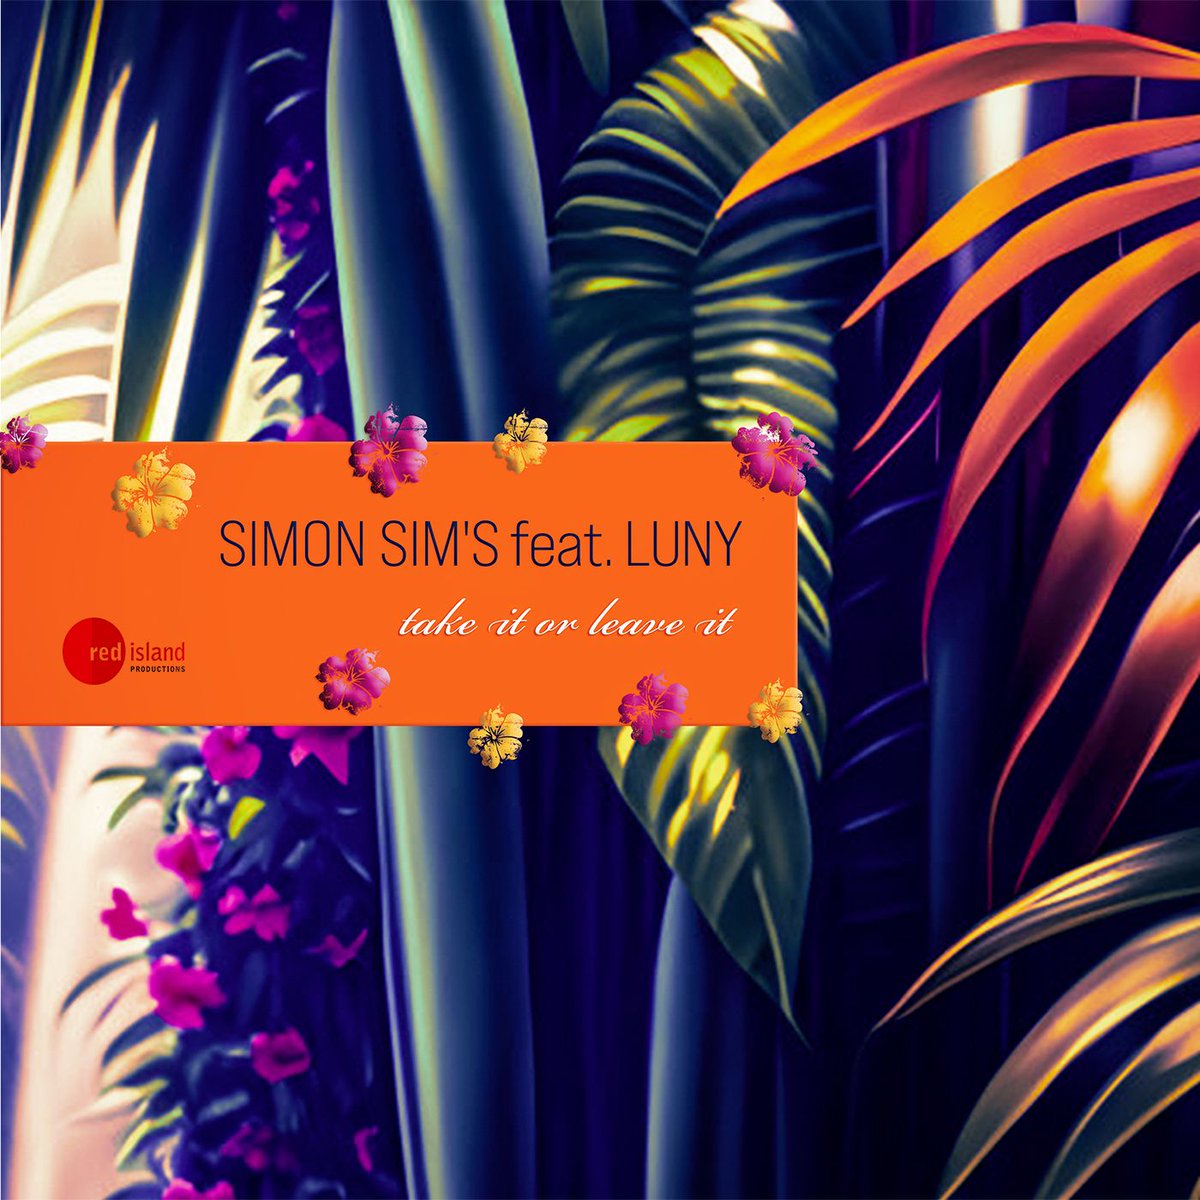 Whether you're a devoted fan of Amapiano or simply appreciate quality music, 'Take It or Leave It' by Simon Sim's is a standout track from this exciting album. #indiedockmusicblog #Afrobeats eu1.hubs.ly/H09j2tl0